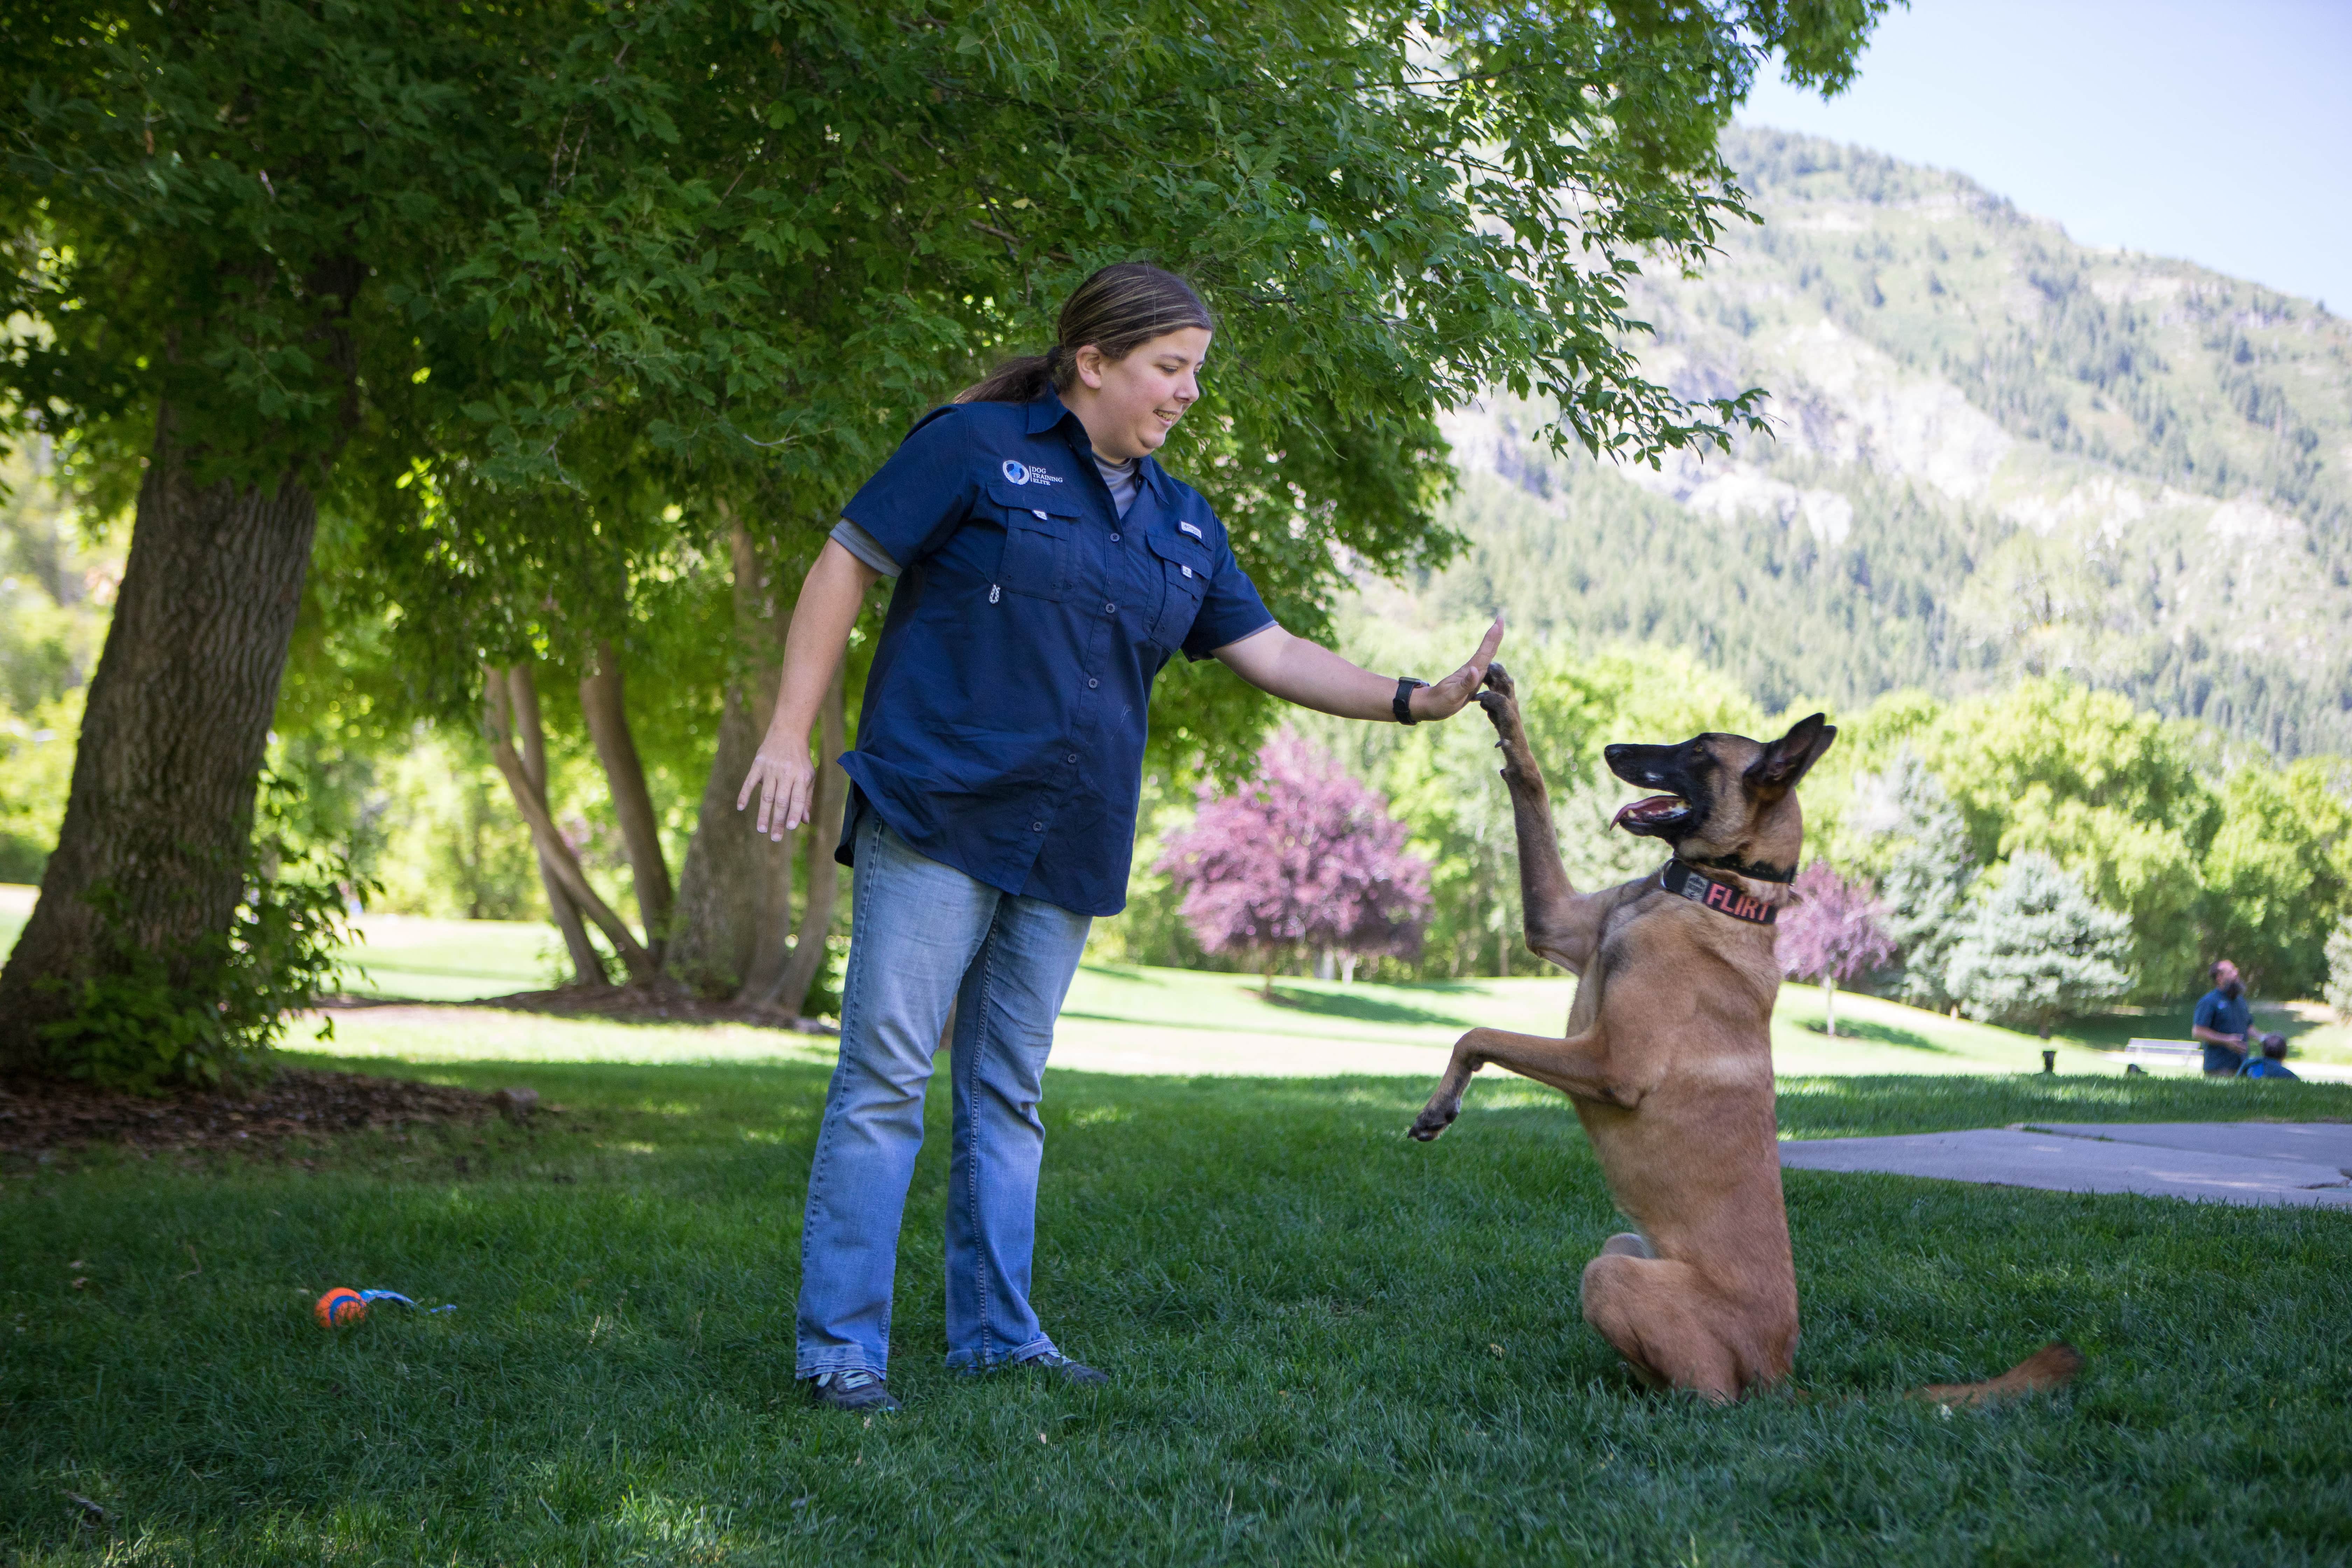 Owning a dog training franchise with Dog Training Elite is the perfect business opportunity for first responders.